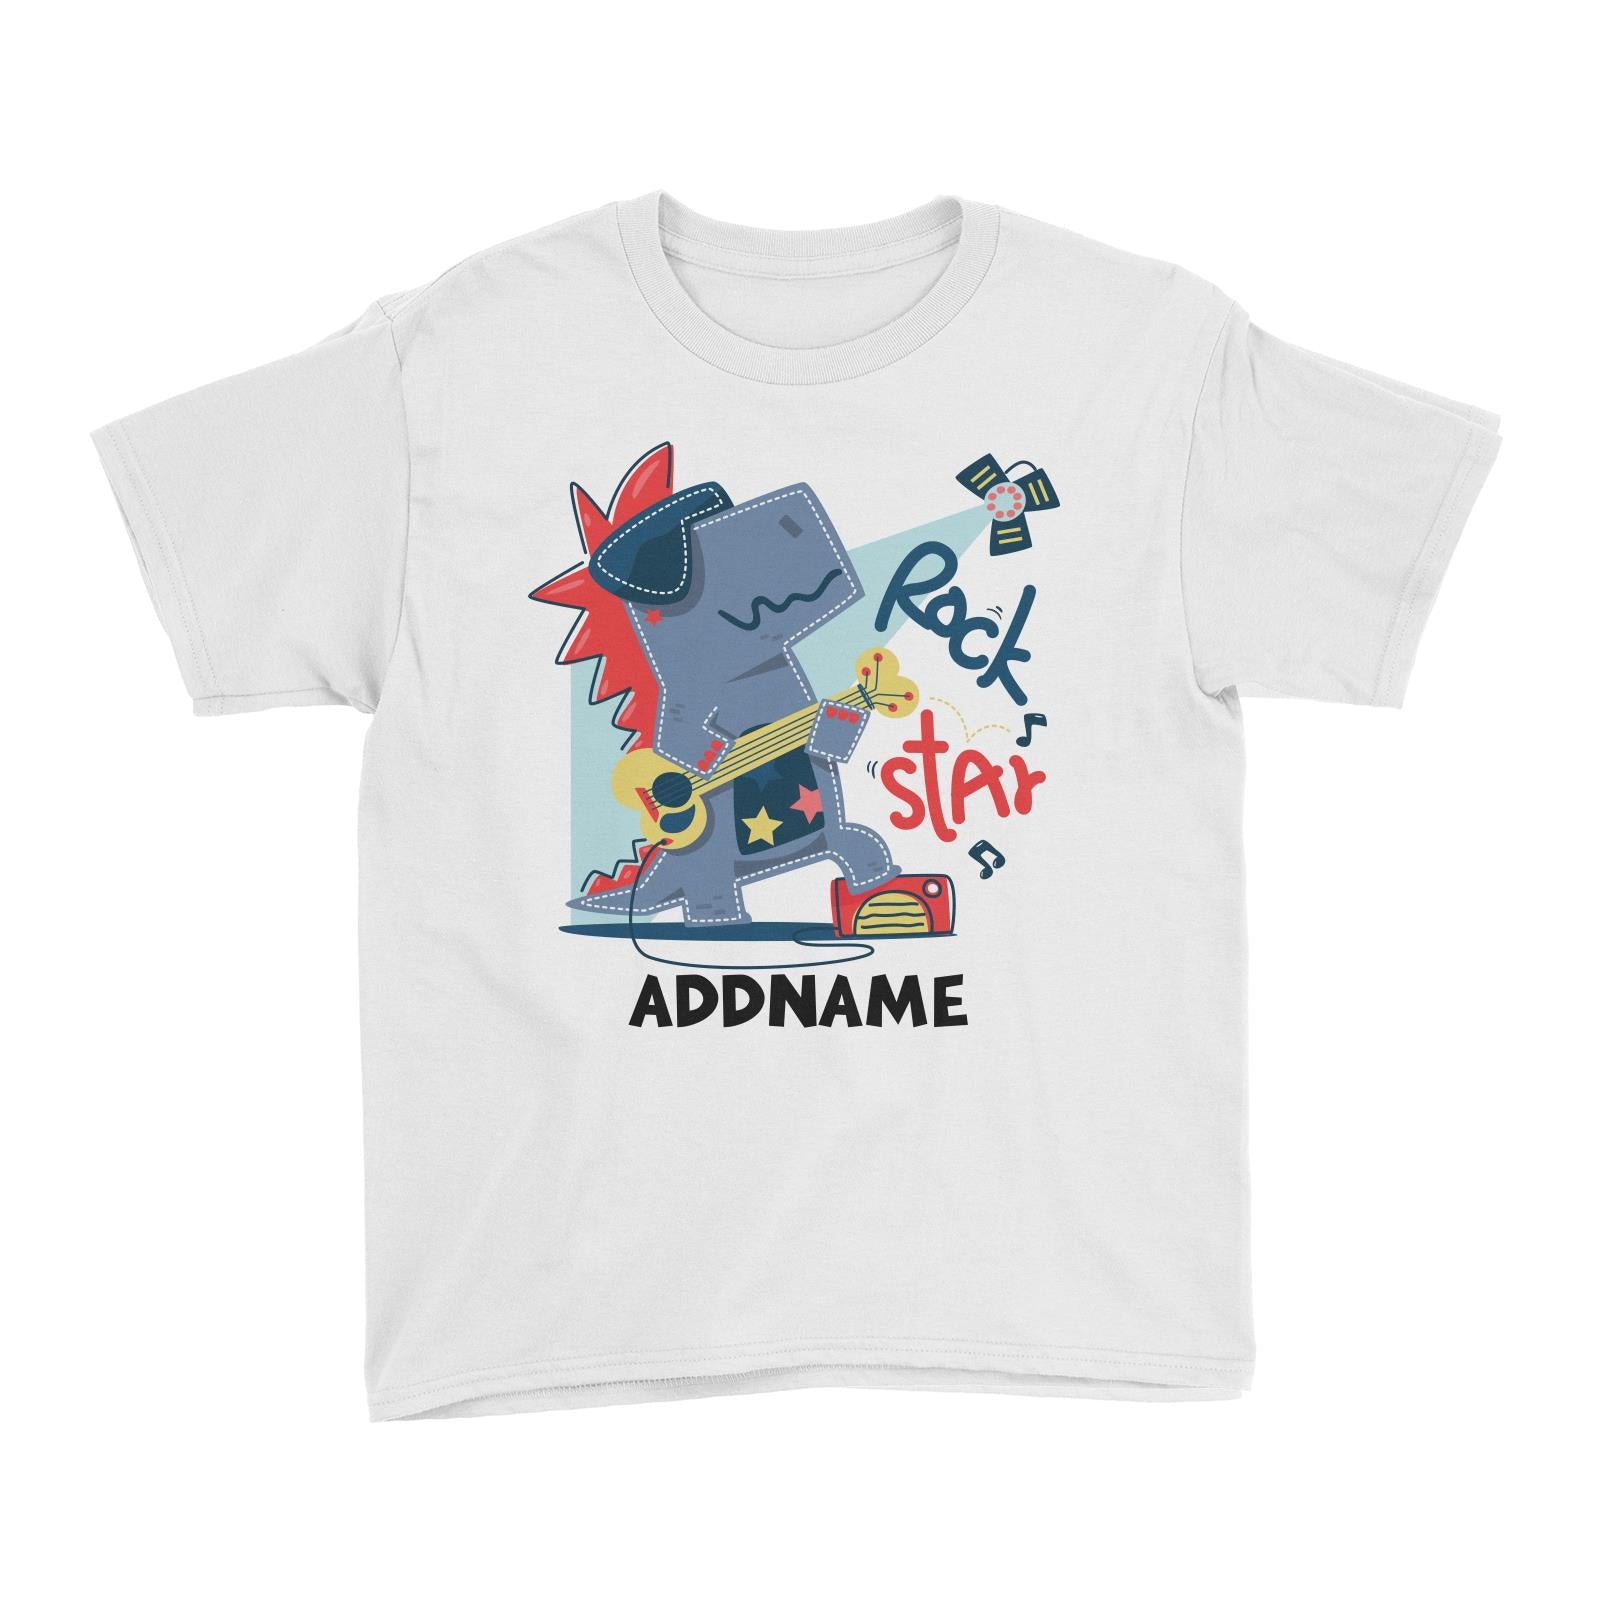 Rock Star Dinosaur with Guitar Addname White Kid's T-Shirt